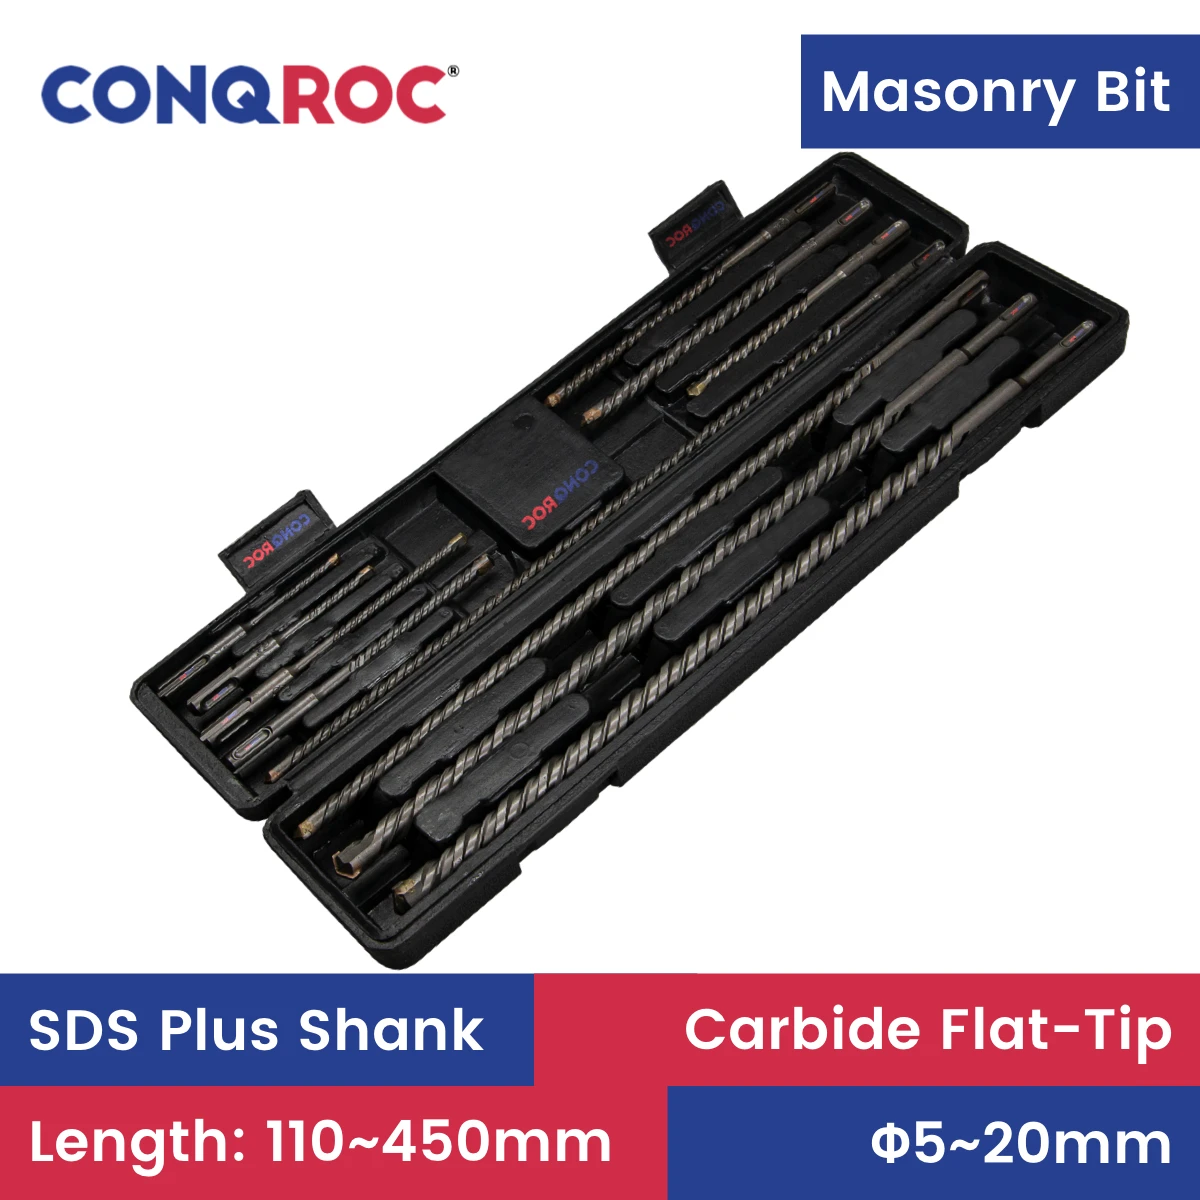 11 Pieces SDS Plus Shank Long Masonry Drill Bits Set Carbide Flat-Tip Electric Hammer Bits Kit with Case